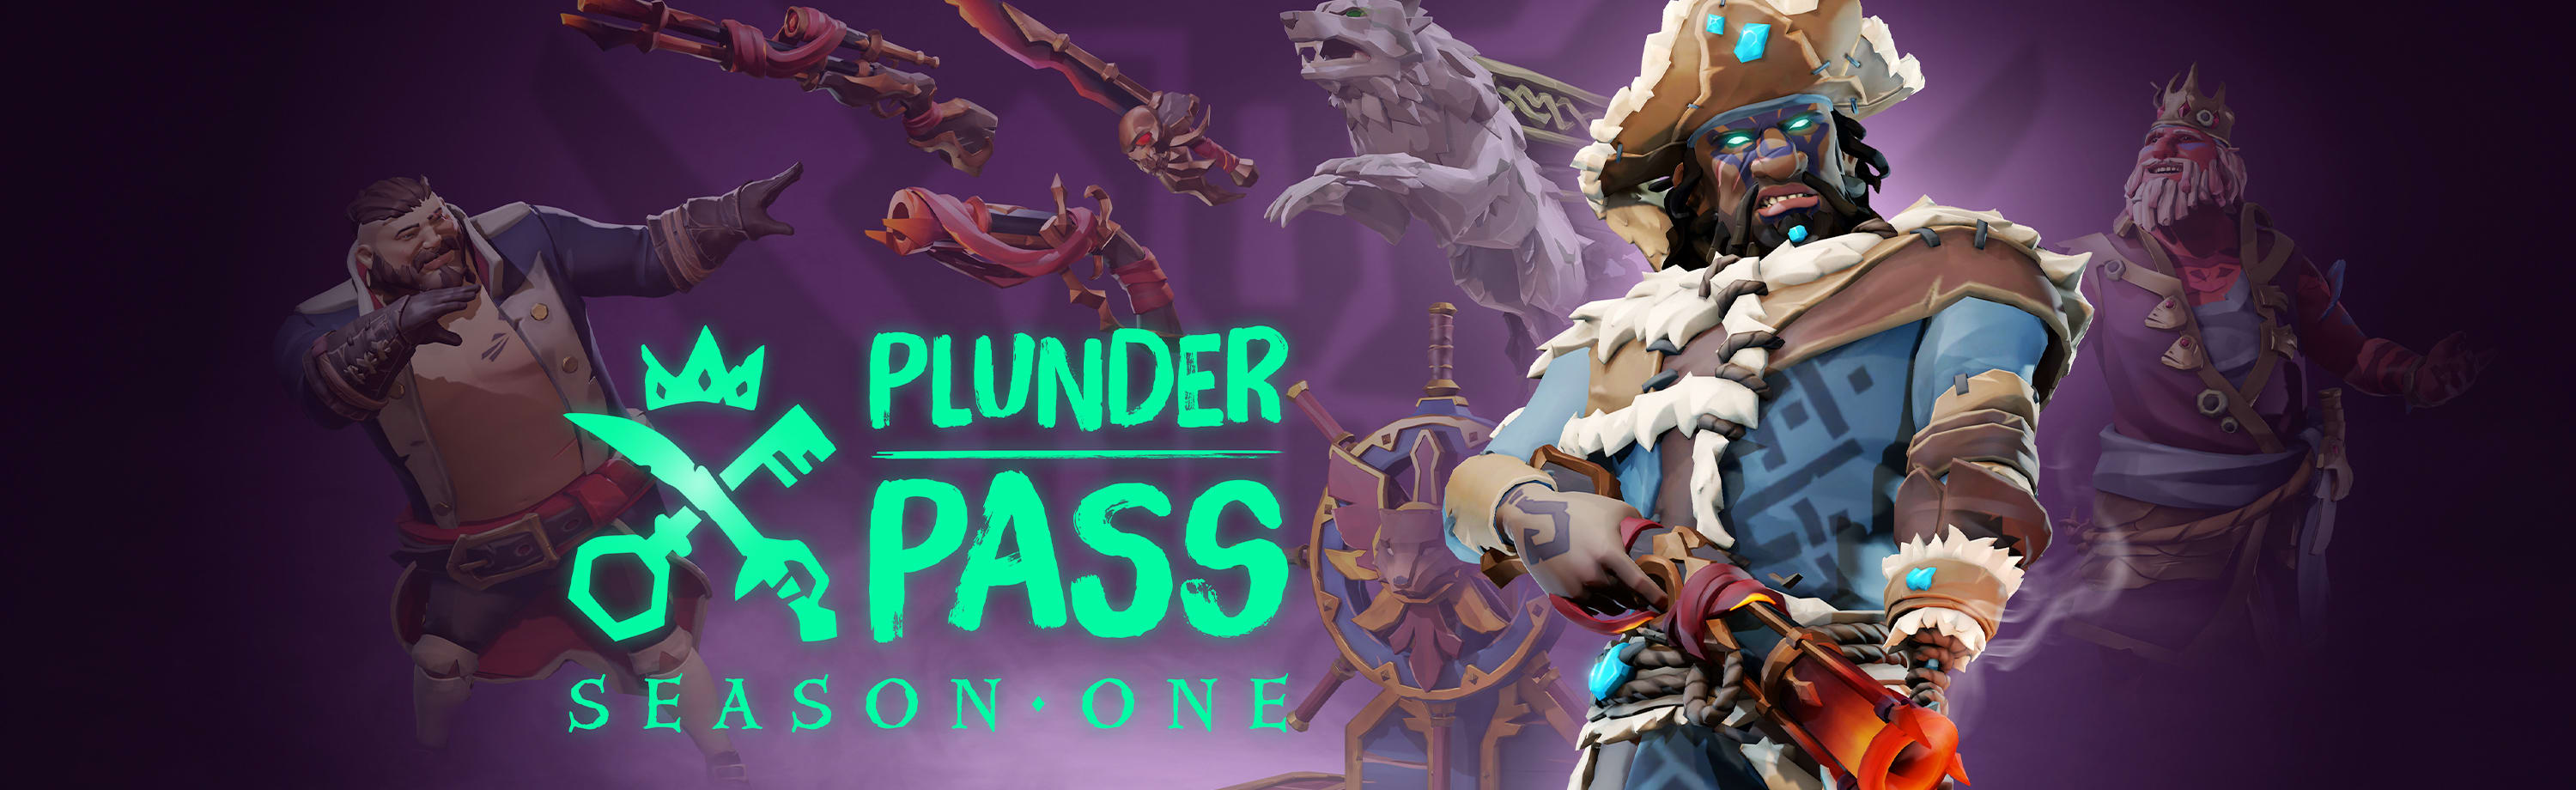 The Plunder Pass for Season One